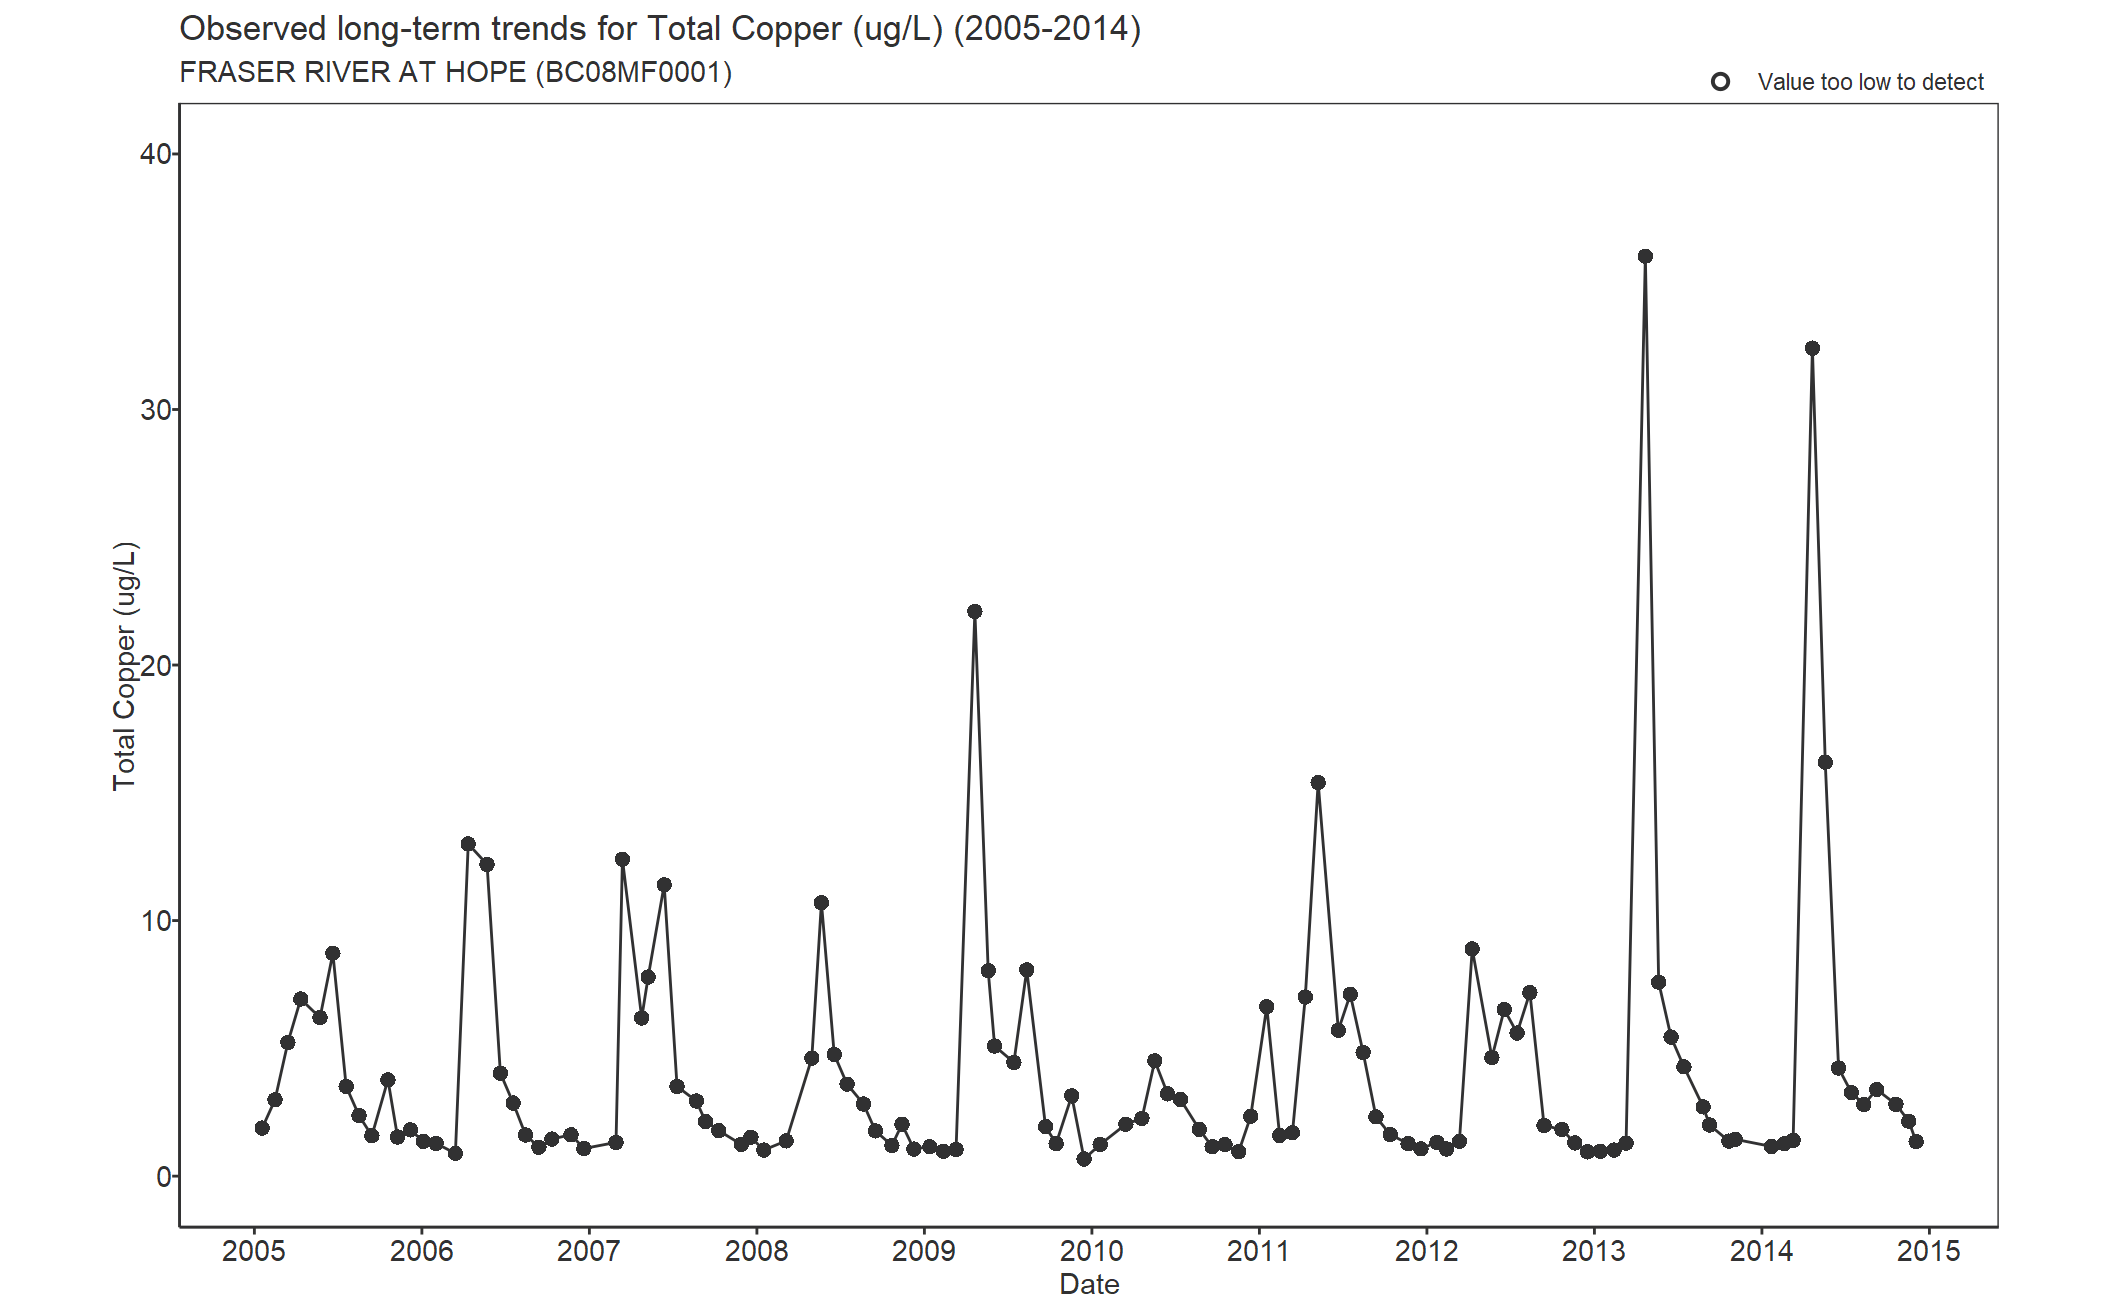 Observed long-term trends for Copper Total (2005-2014)